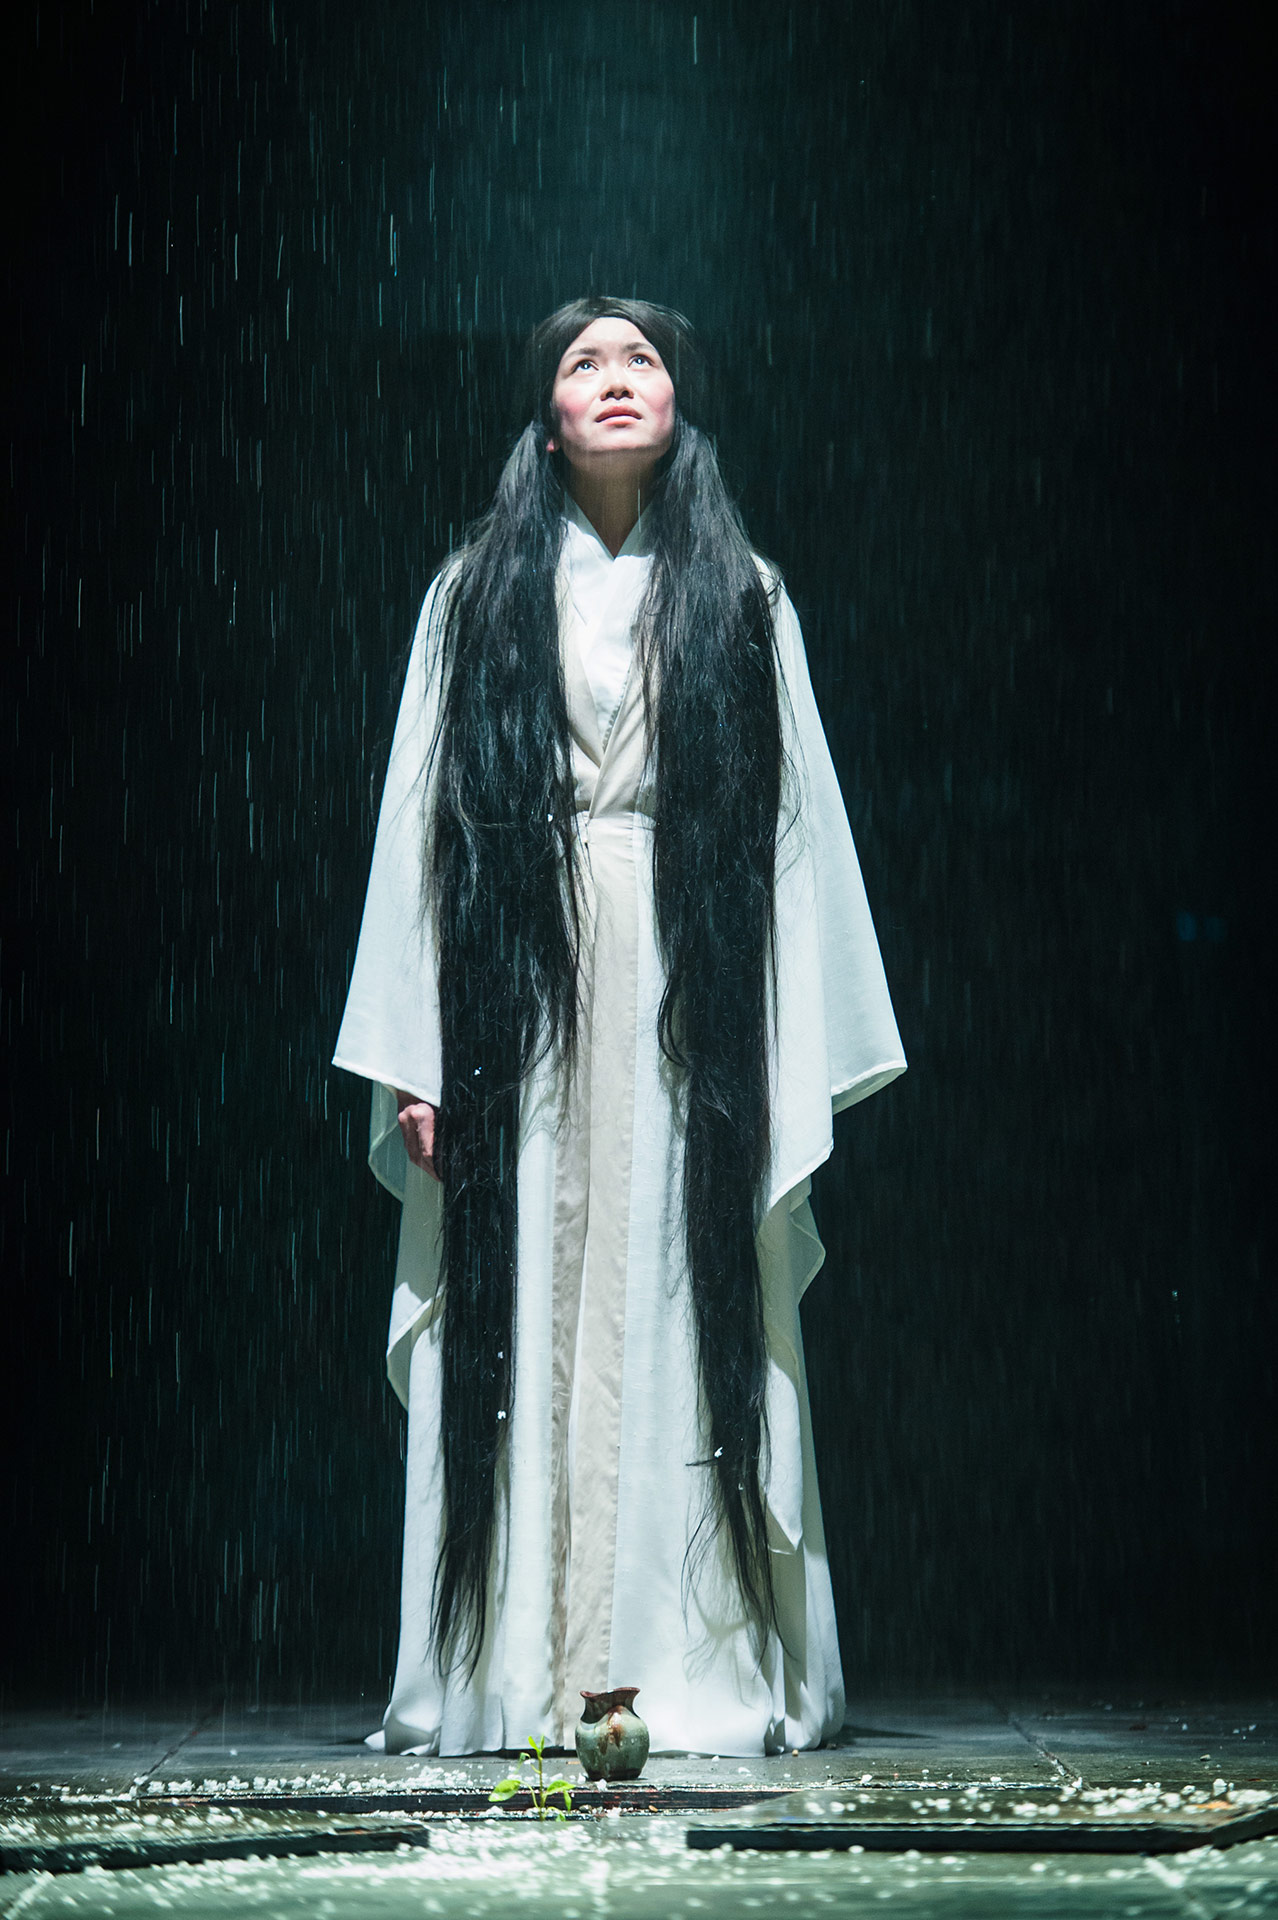 Production Photo of Snow in Midsummer